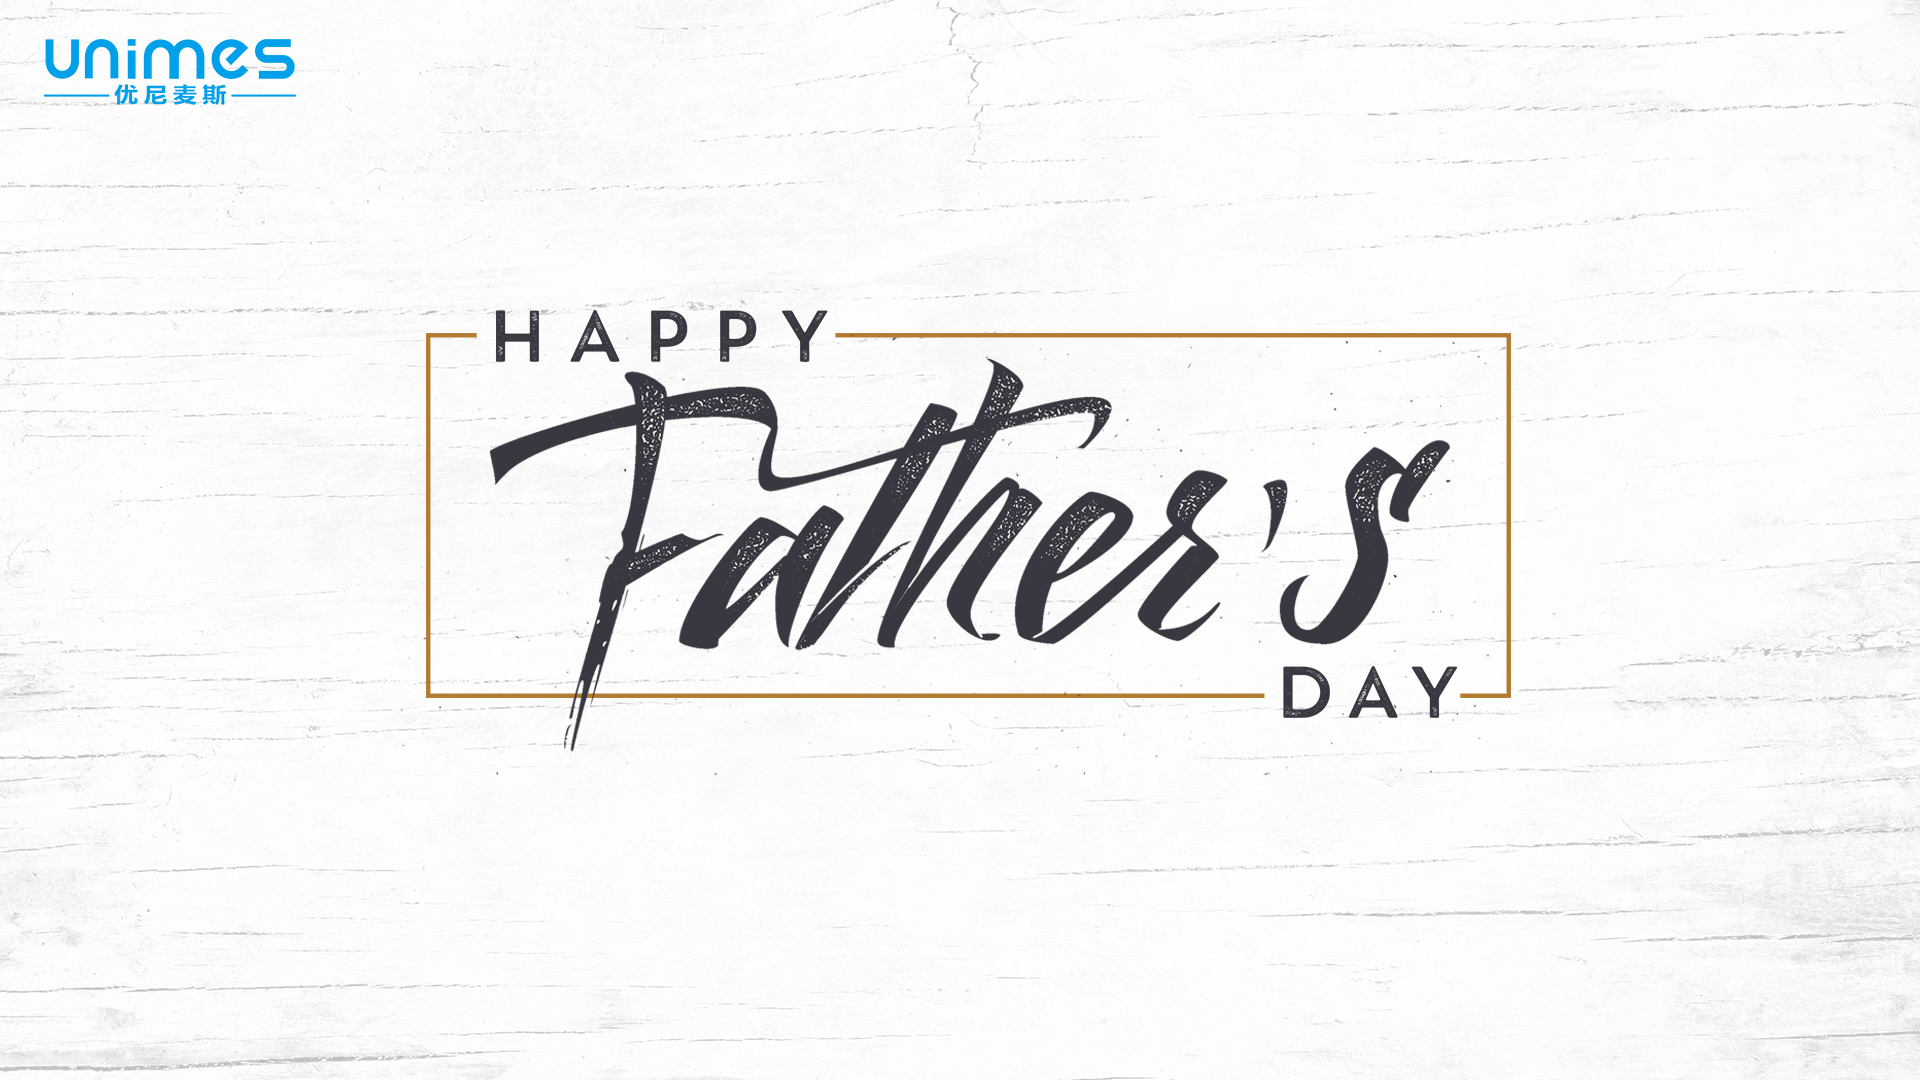 Unimes wishes Happy Father's Day to all the greatest dads!